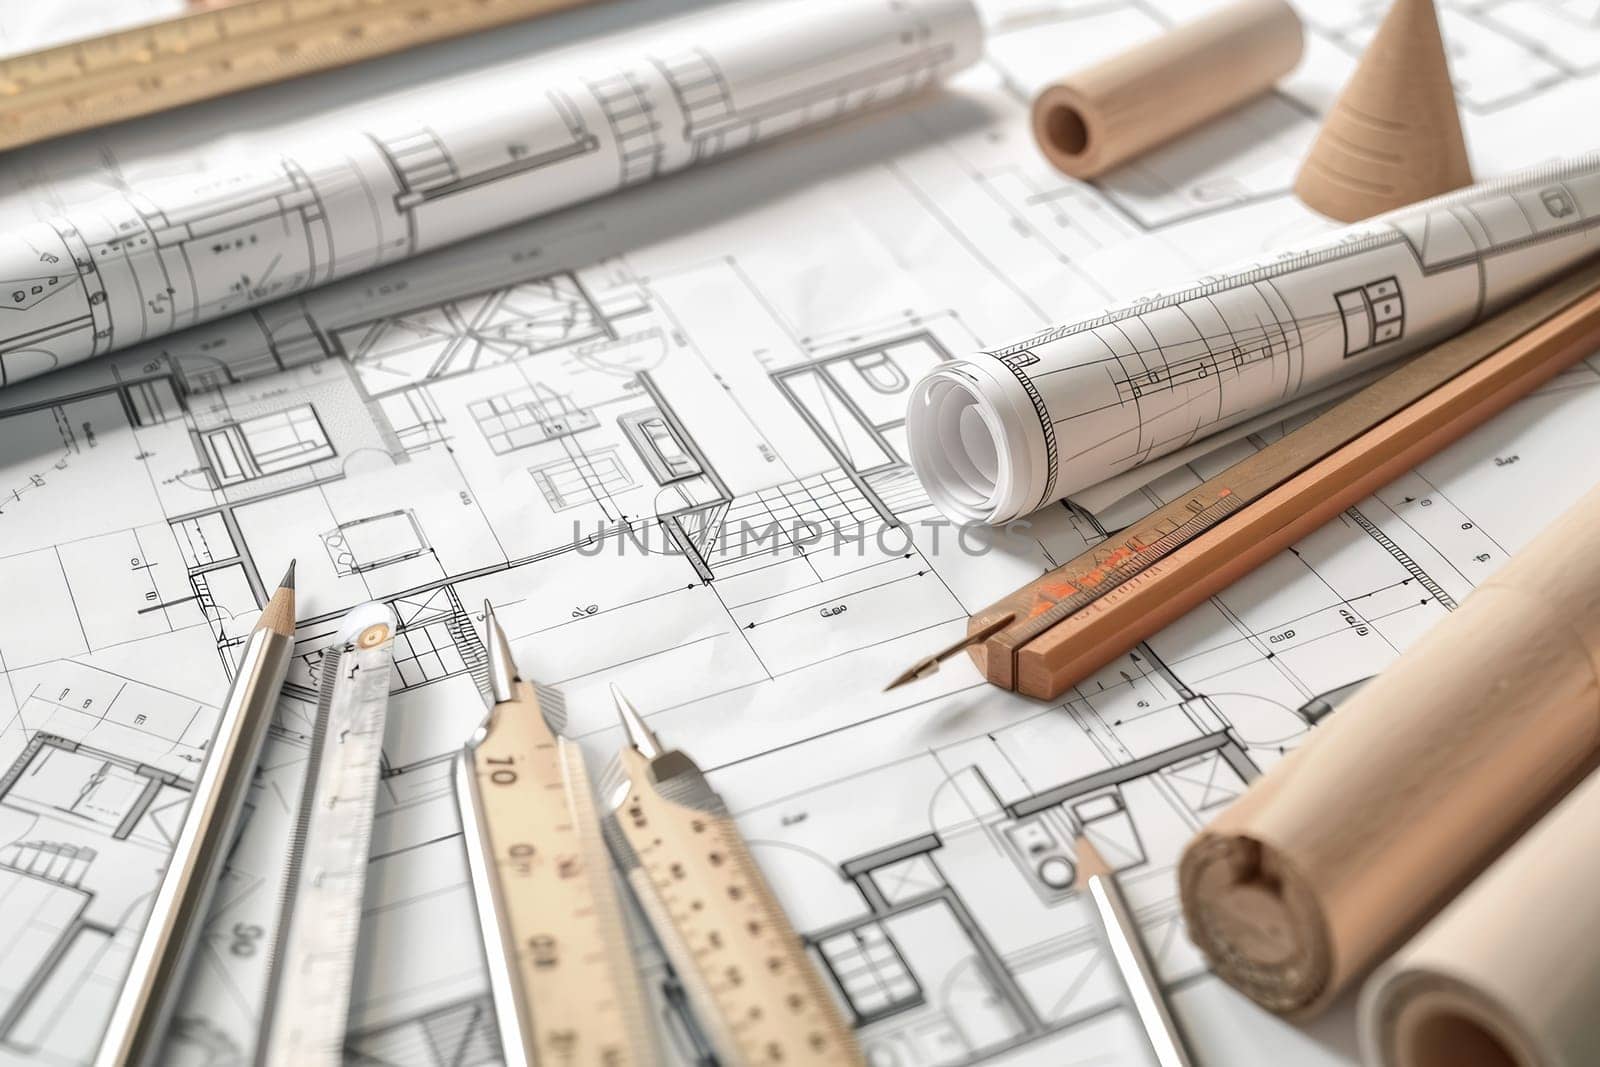 Pencils and rulers meticulously lay on top of a blueprint, ready to bring architectural designs to life with precision and accuracy.